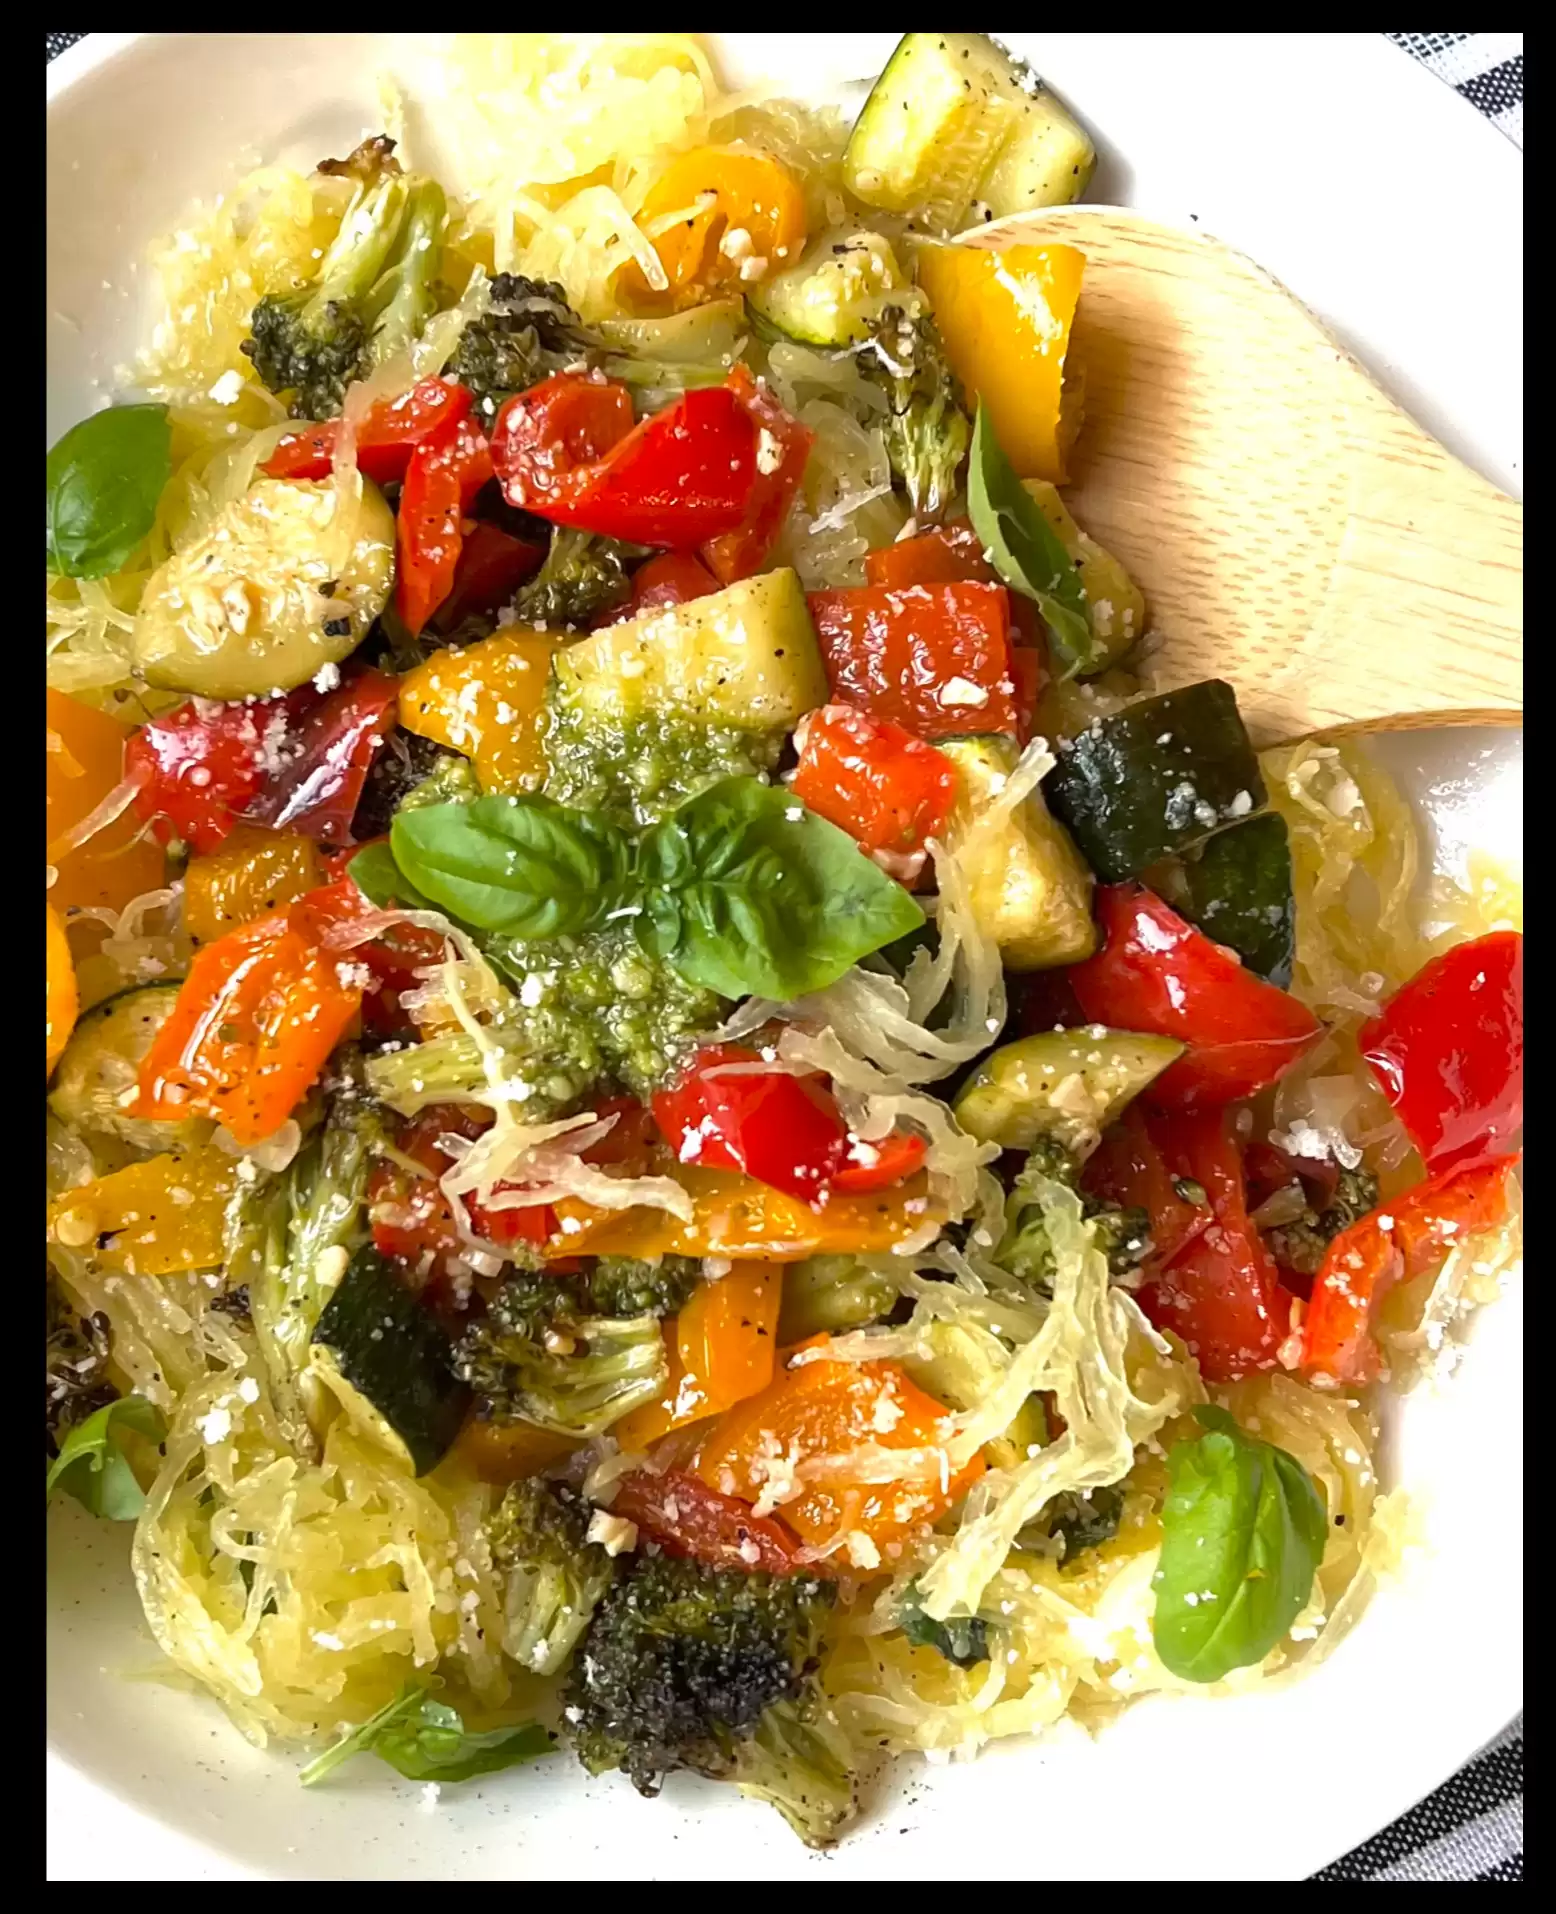 Sheet pan Spaghetti Squash with Roasted Vegetables